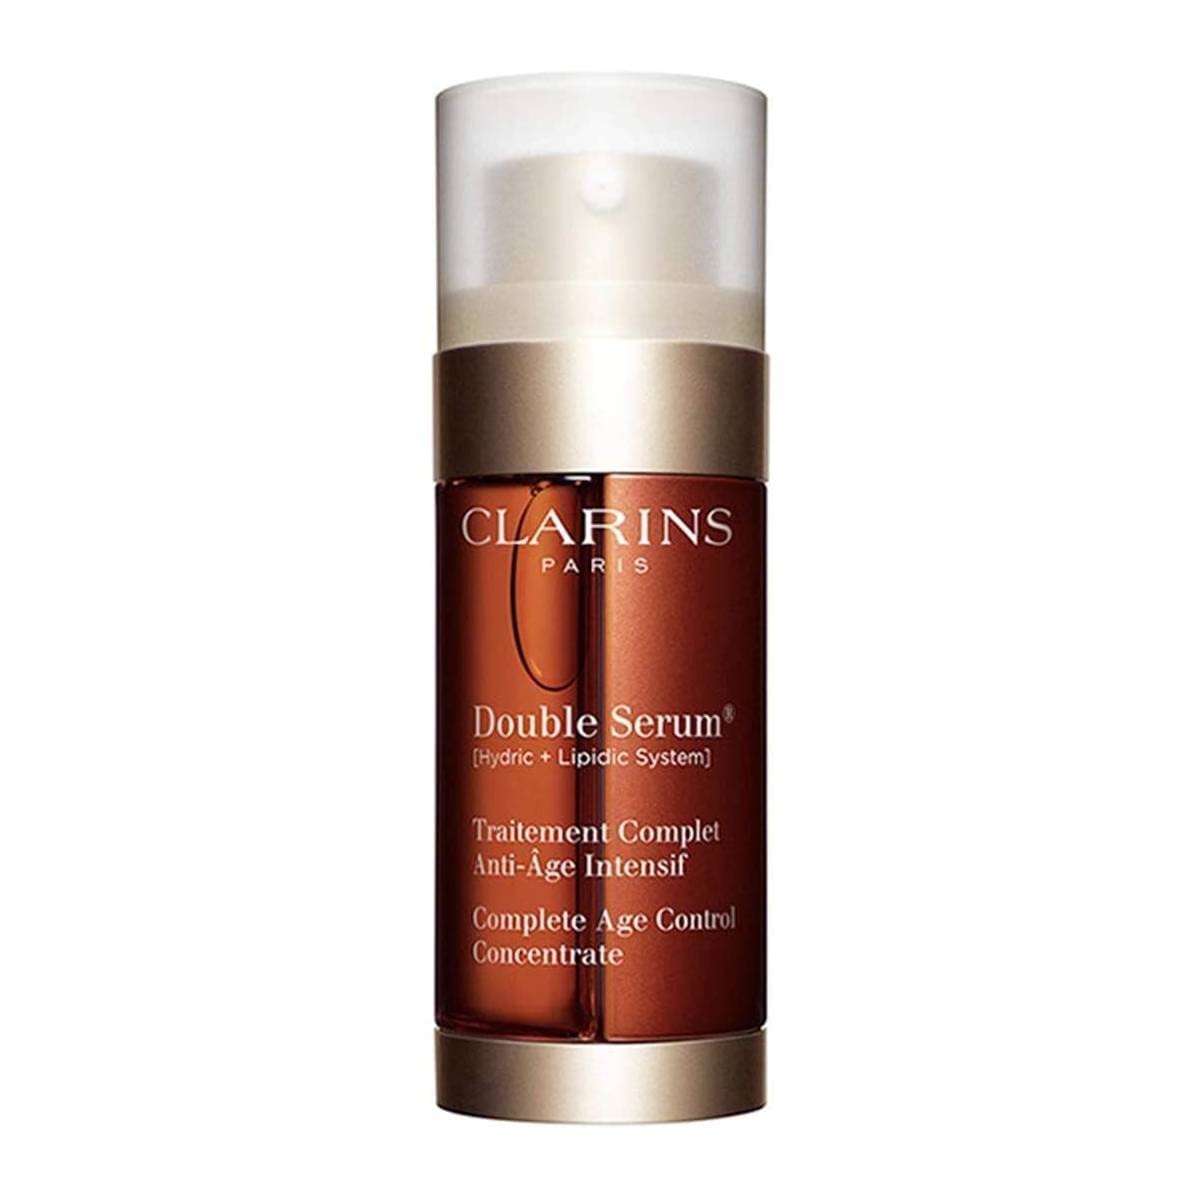 Clarins Double Serum Traitement Complet Anti-Âge Intensive 50 ml